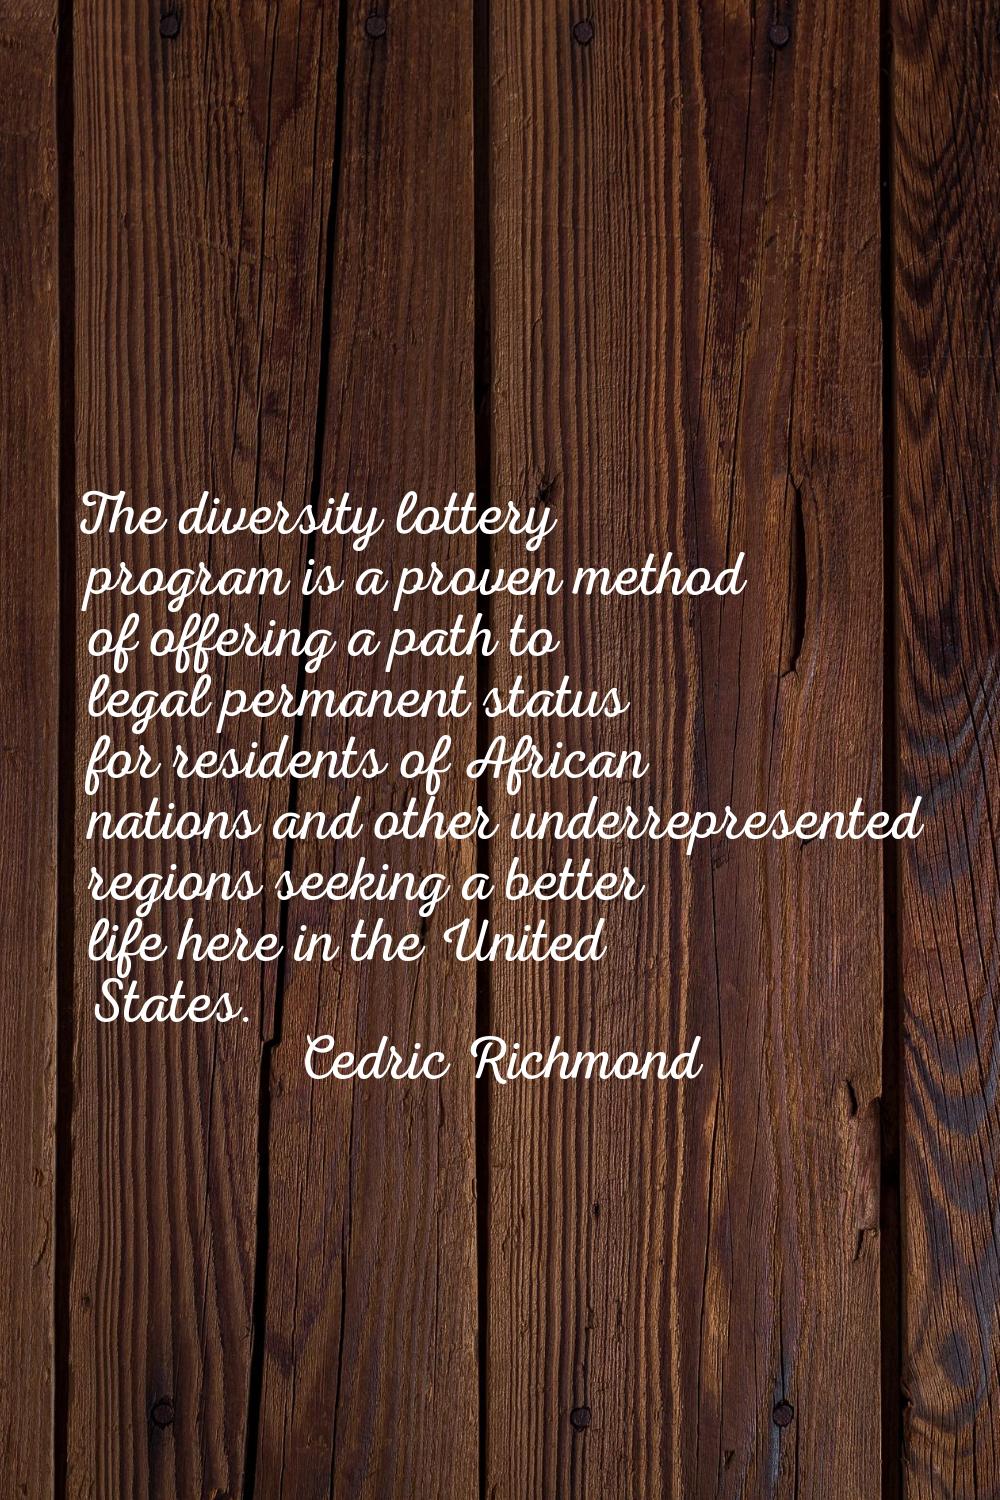 The diversity lottery program is a proven method of offering a path to legal permanent status for r